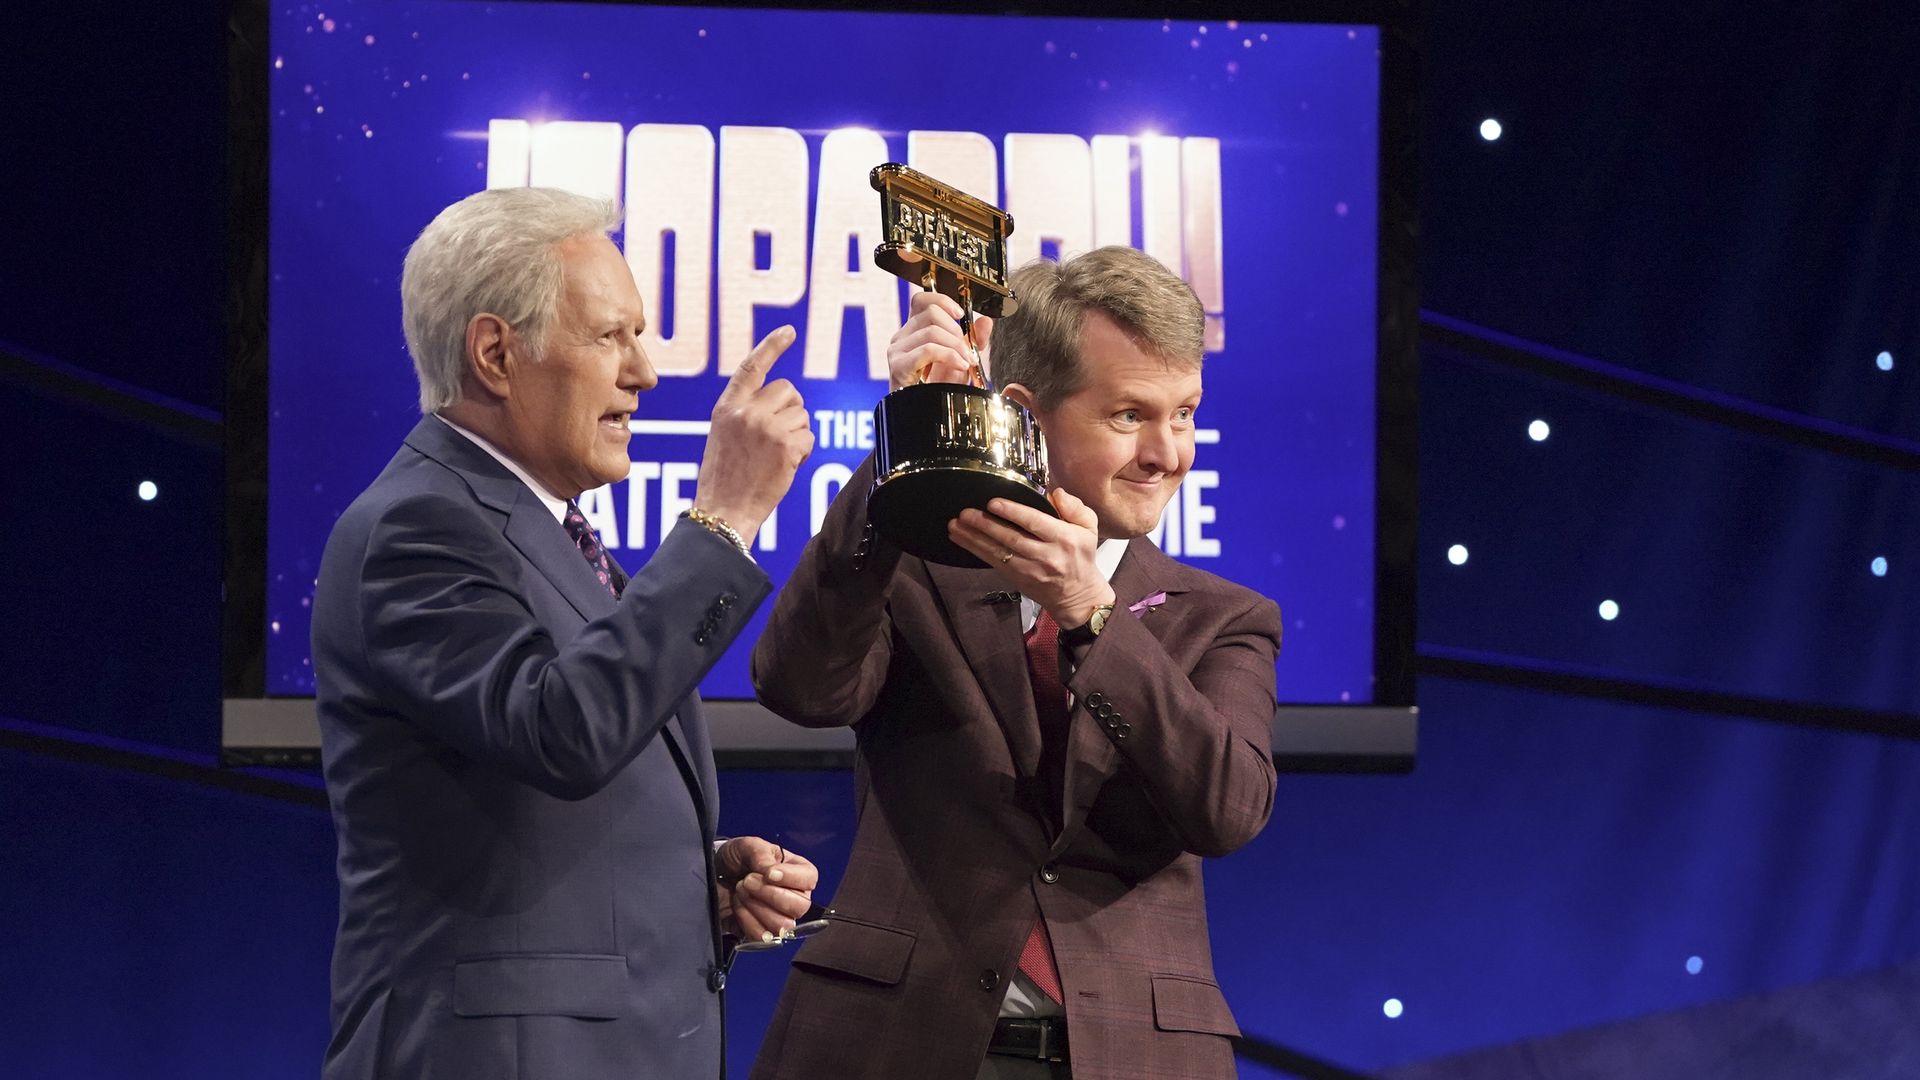 Alex Trebek and Ken Jennings hold up a trophy at  JEOPARDY! The Greatest of All Time